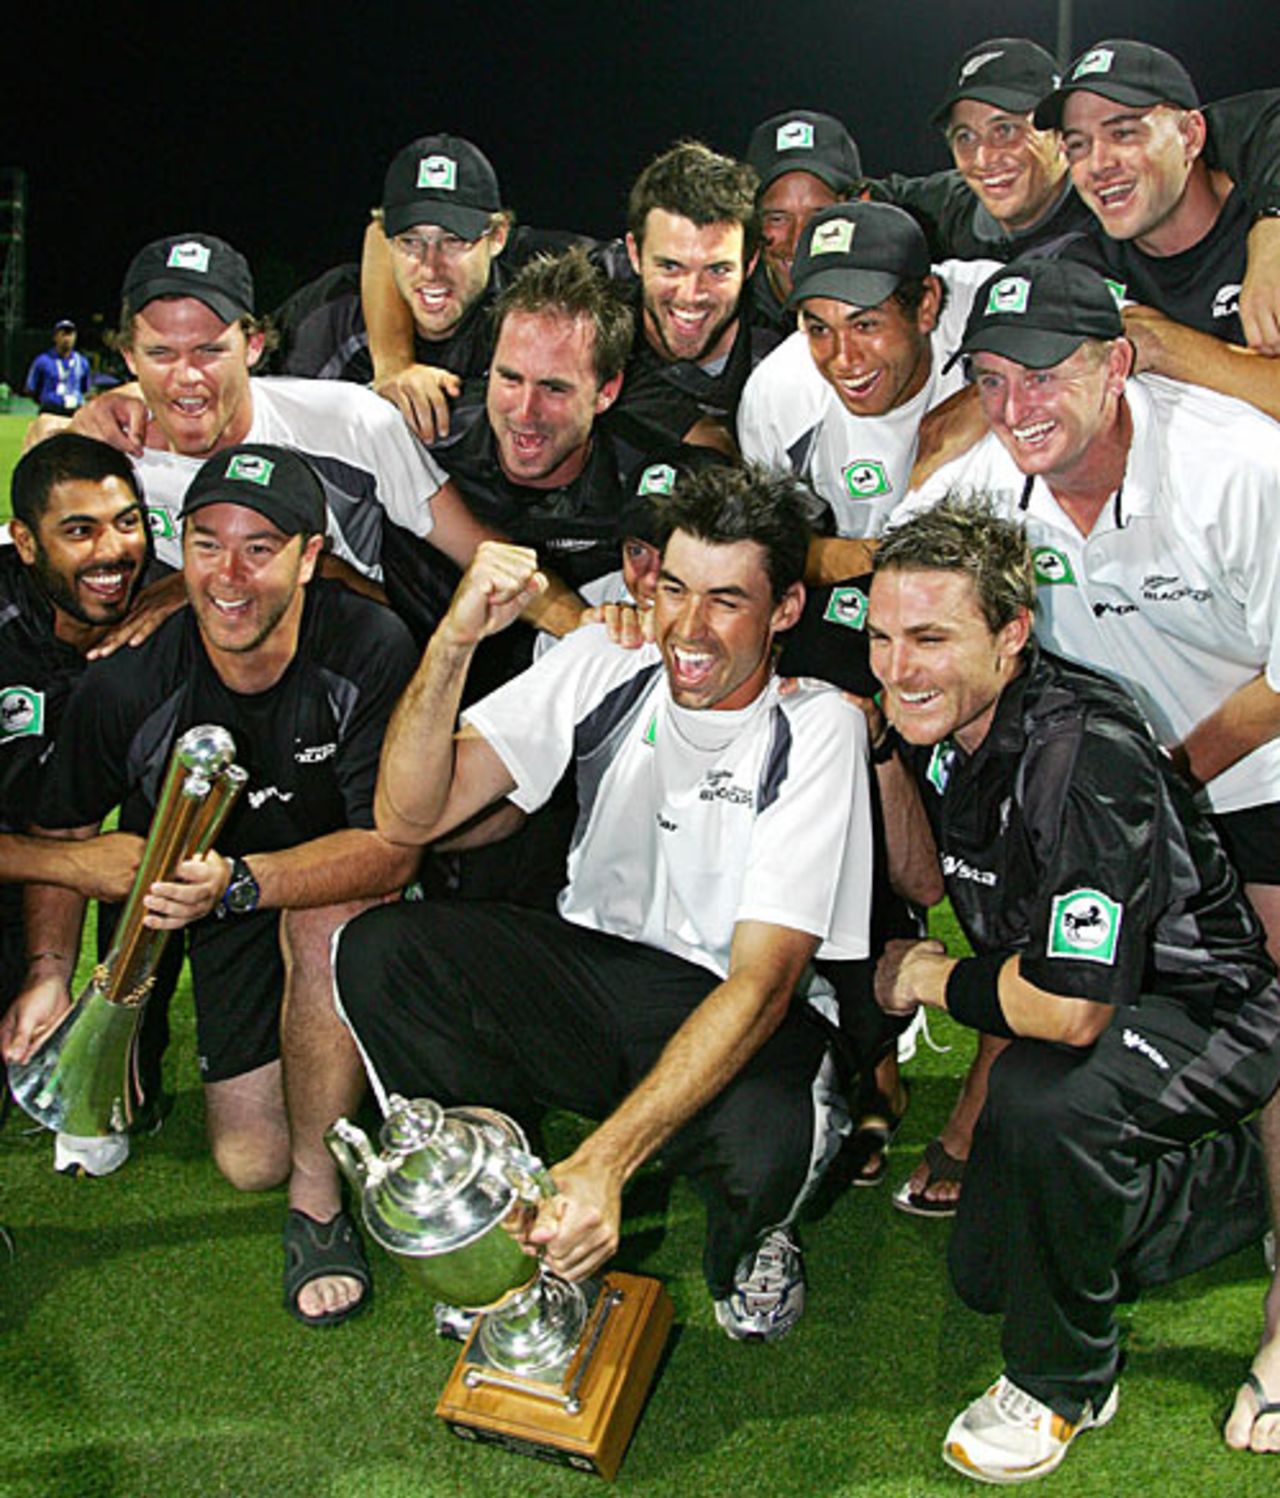 Stephen Fleming leads the celebrations for New Zealand after their brilliant 3-0 victory over Australia, New Zealand v Australia, Chappell-Hadlee Trophy, 3rd match, Hamilton, February 20, 2007